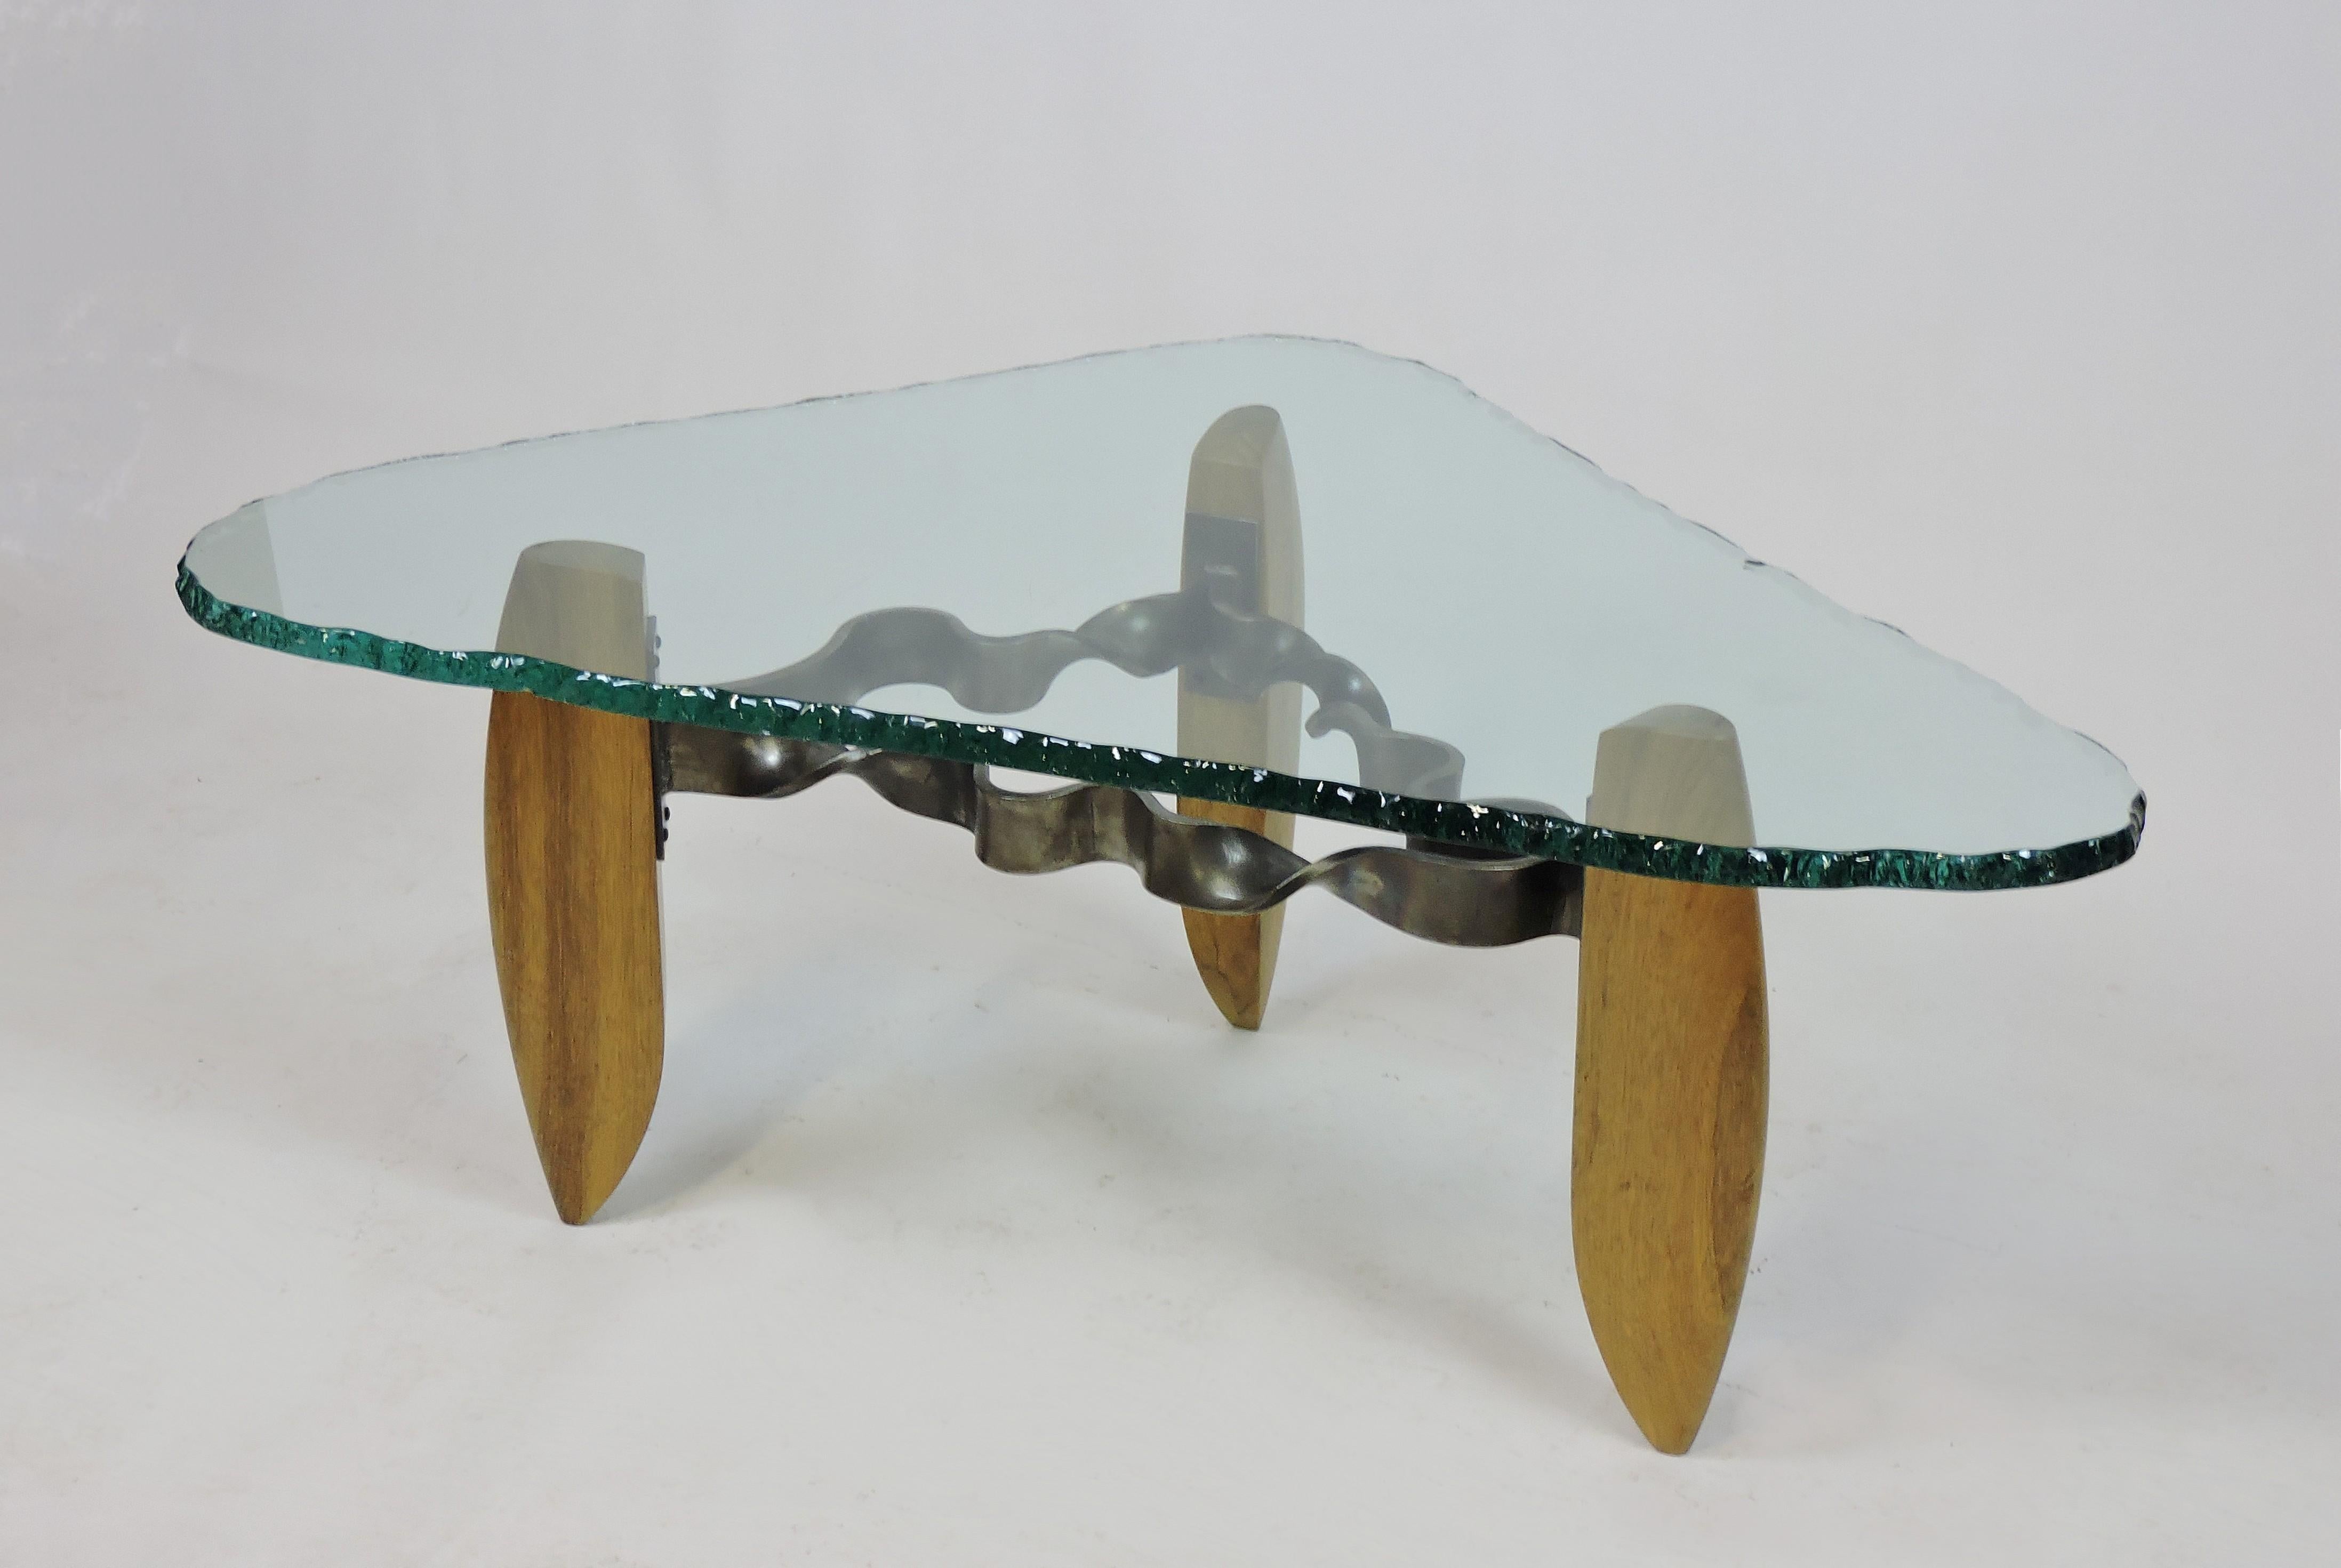 Very cool and unique hand made coffee table in the style of Silas Seandel. This high quality table has thick twisted metal stretchers attached to 3 sculpted wooden legs. The top is 3/4 inch thick glass with a decorative chipped edge. Very well made,